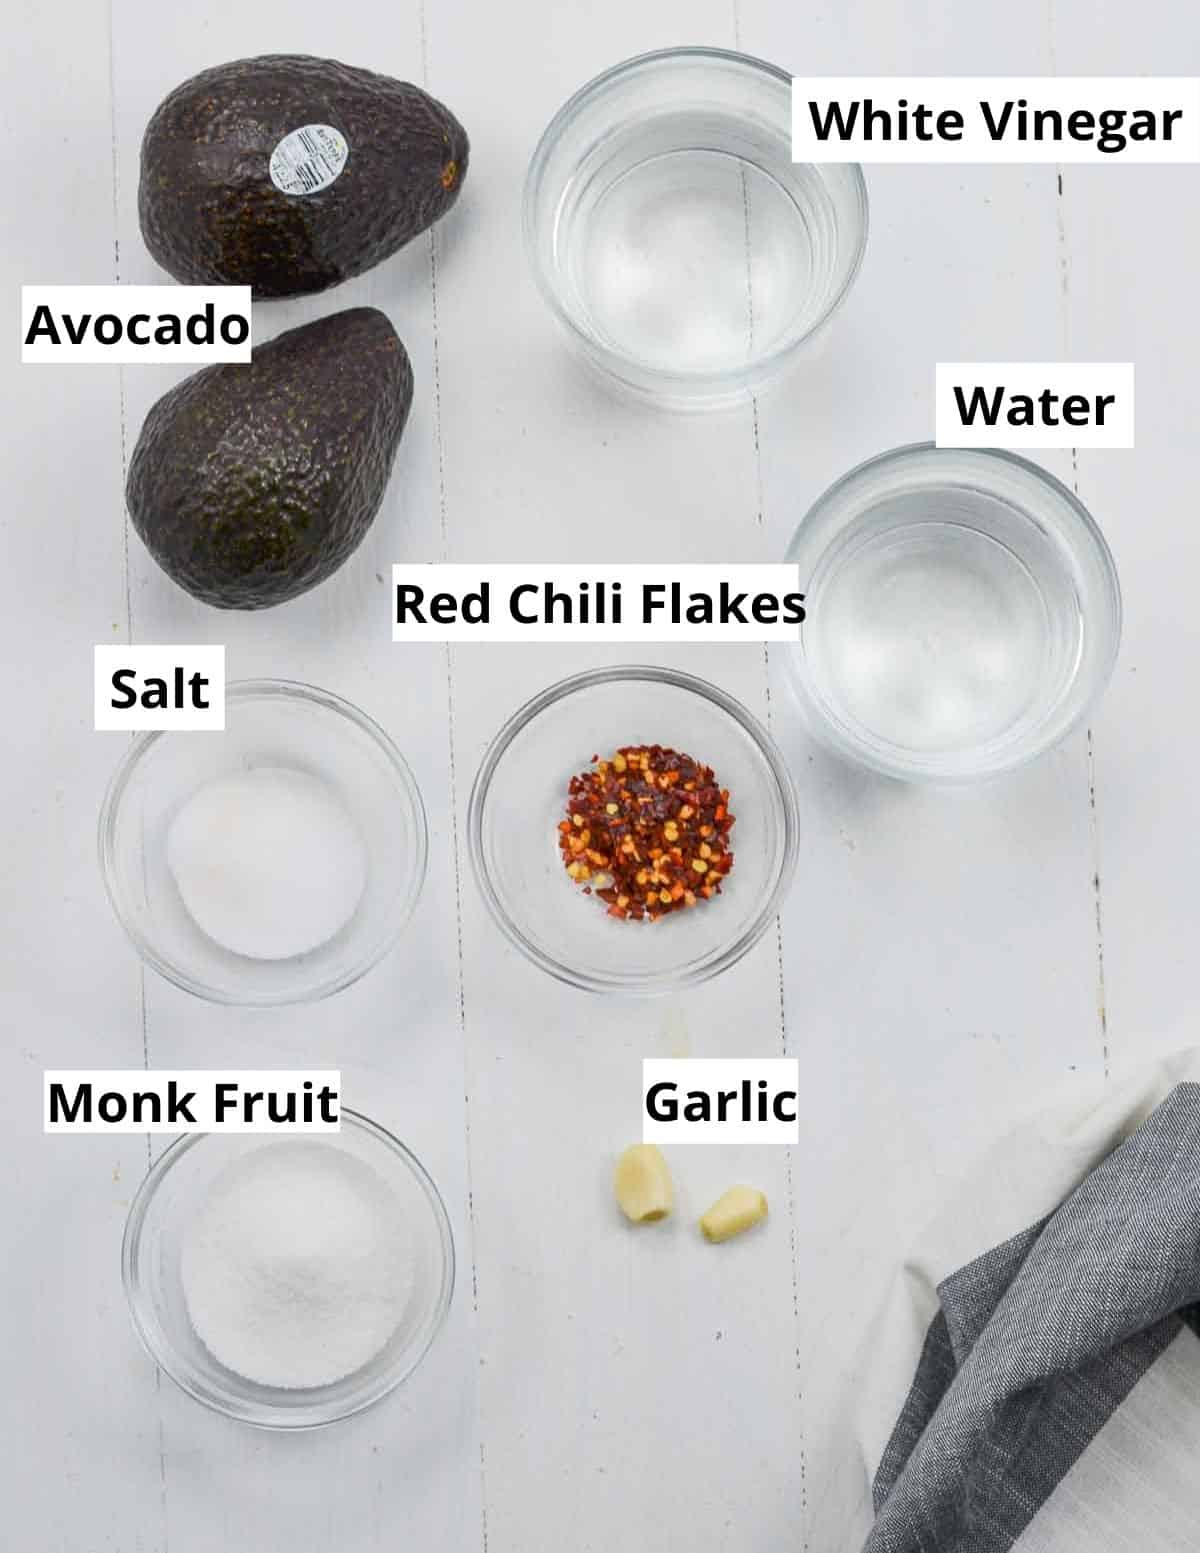 all ingredients listed in the pic to make avocado pickle.